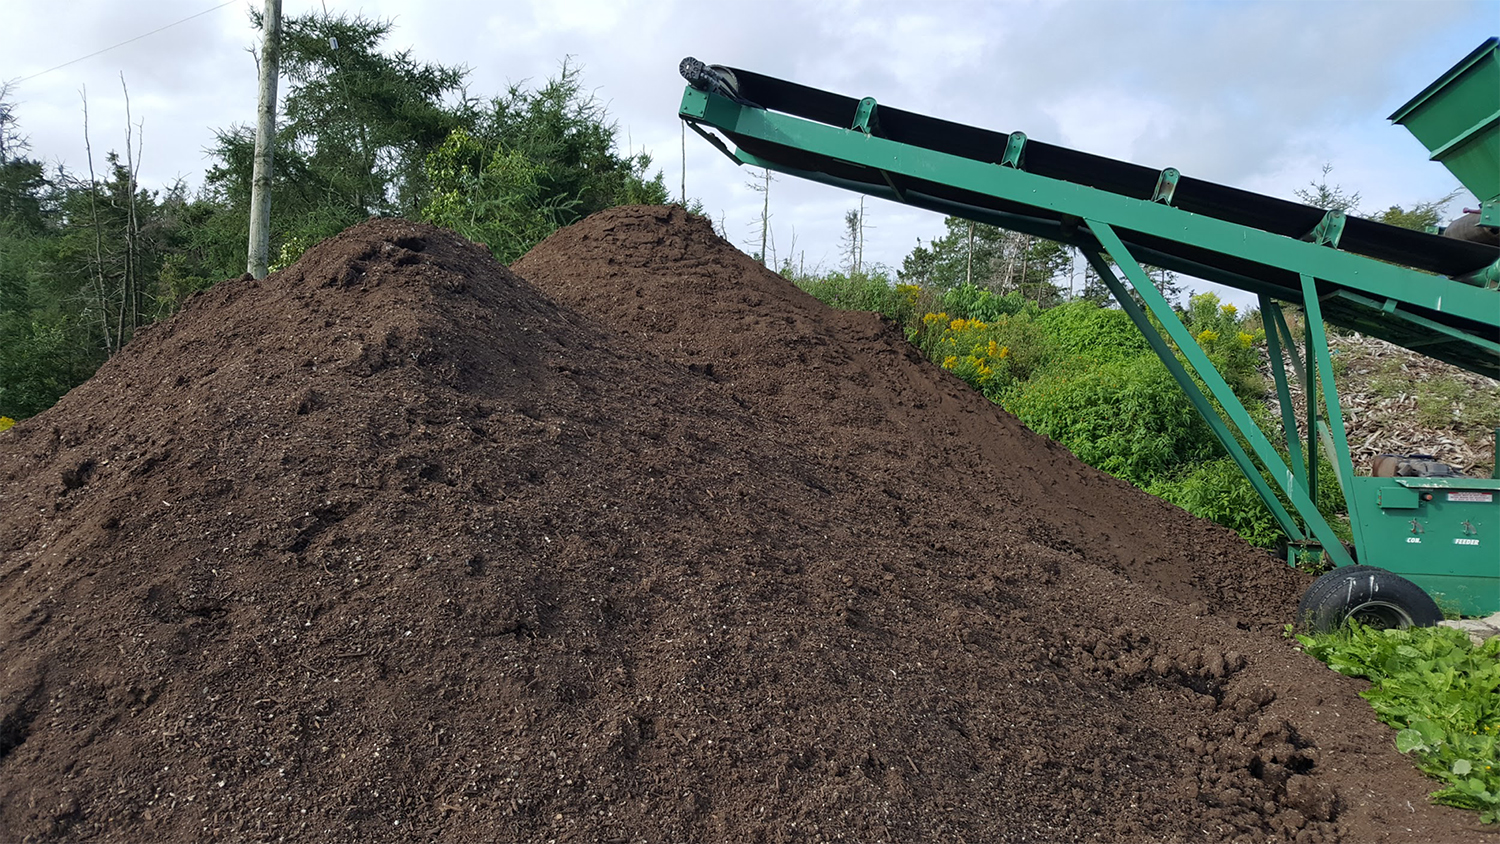 Composting processing into pile